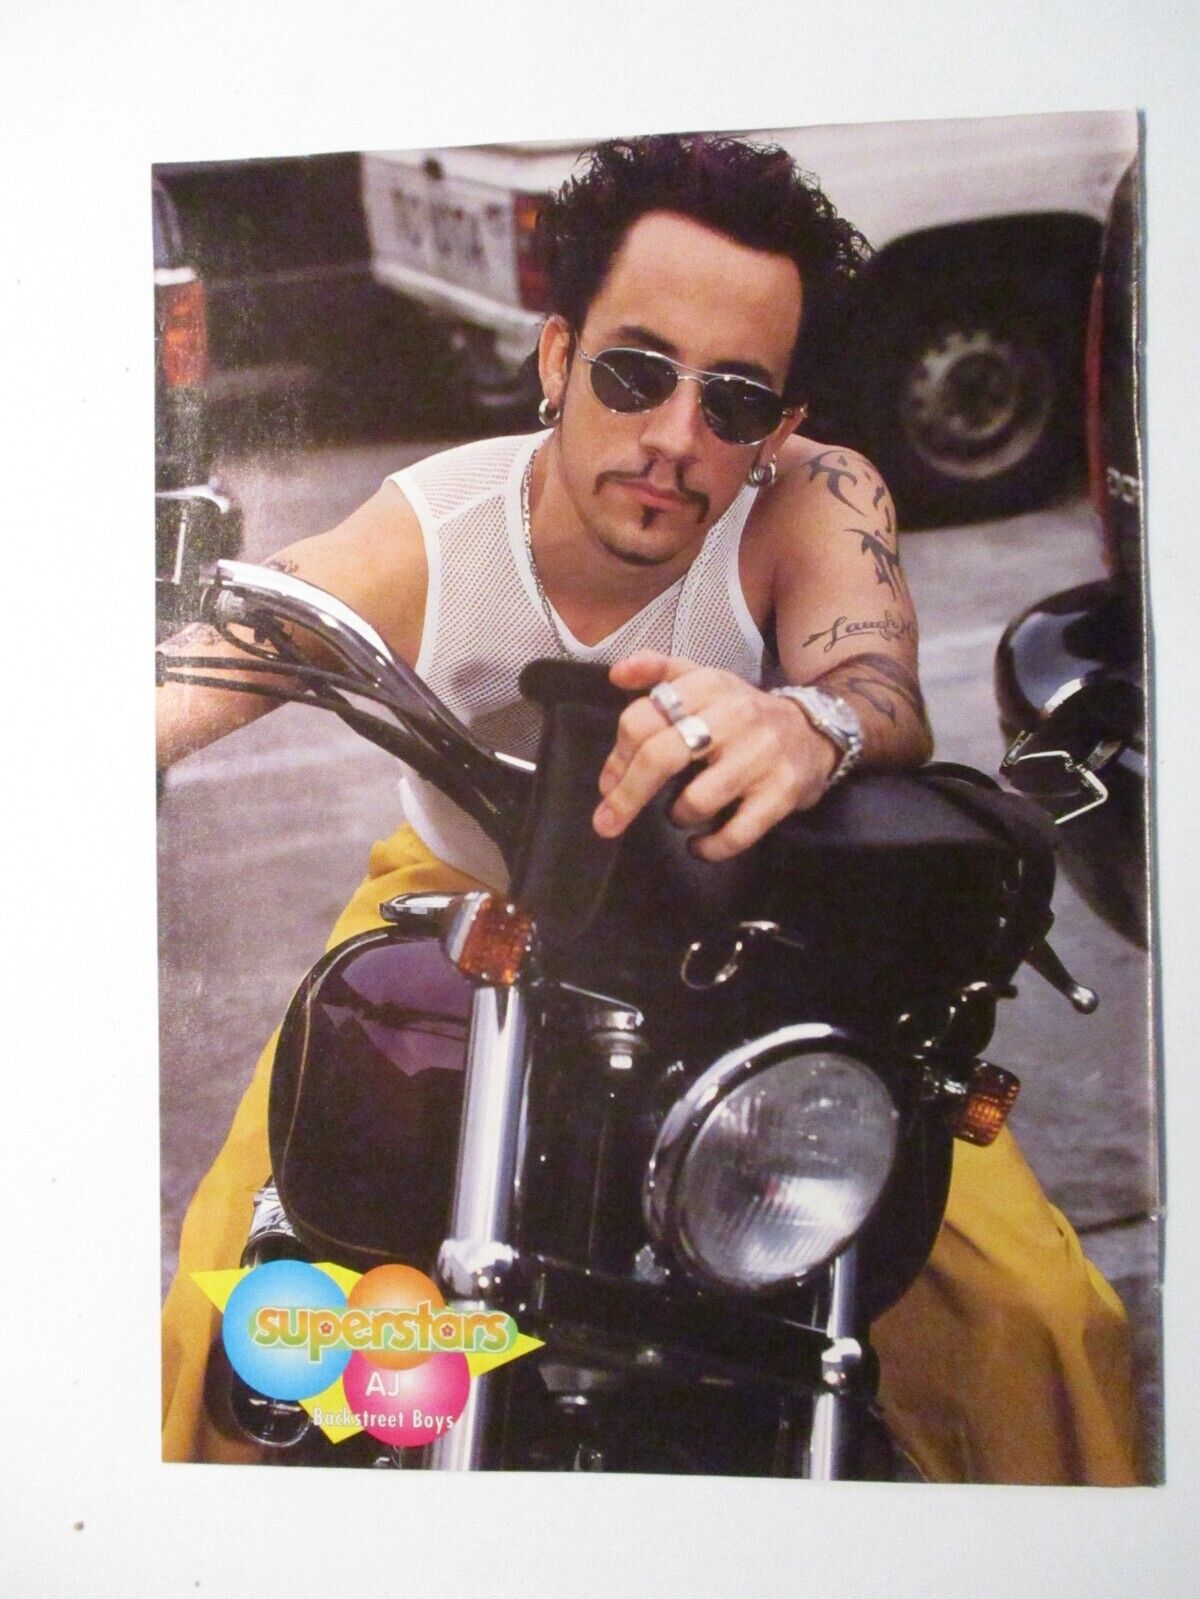 AC MCLEAN ON MOTORCYCLE PIN UP SUPERSTARS TEEN MAGAZINE CLIPPING PICTURE F12